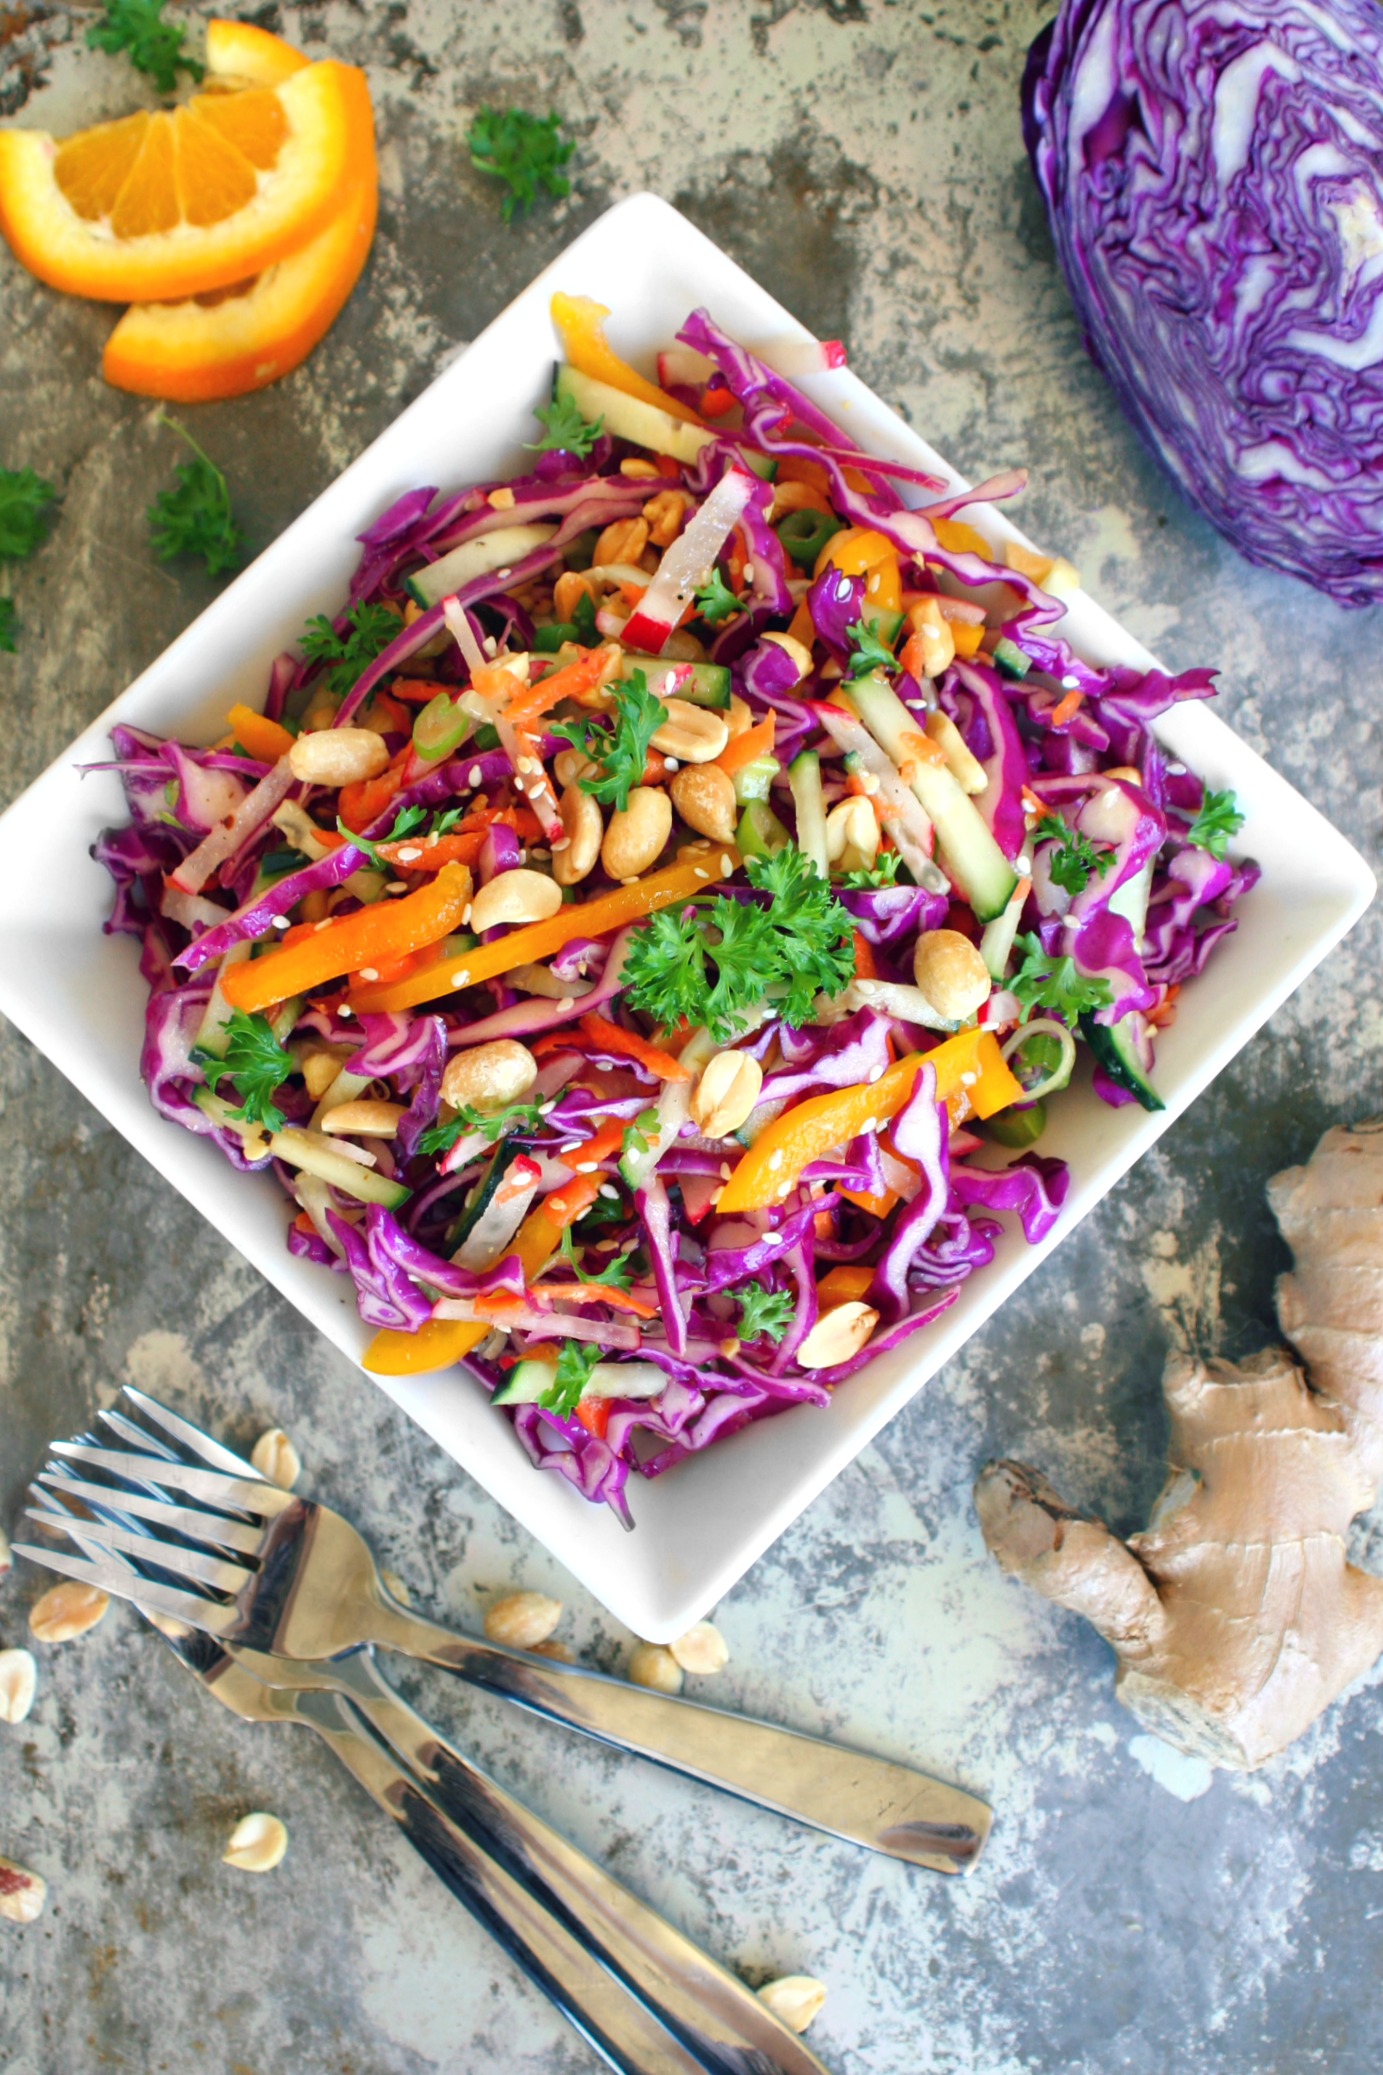 Orange and Ginger Cabbage Slaw with Roasted Peanuts